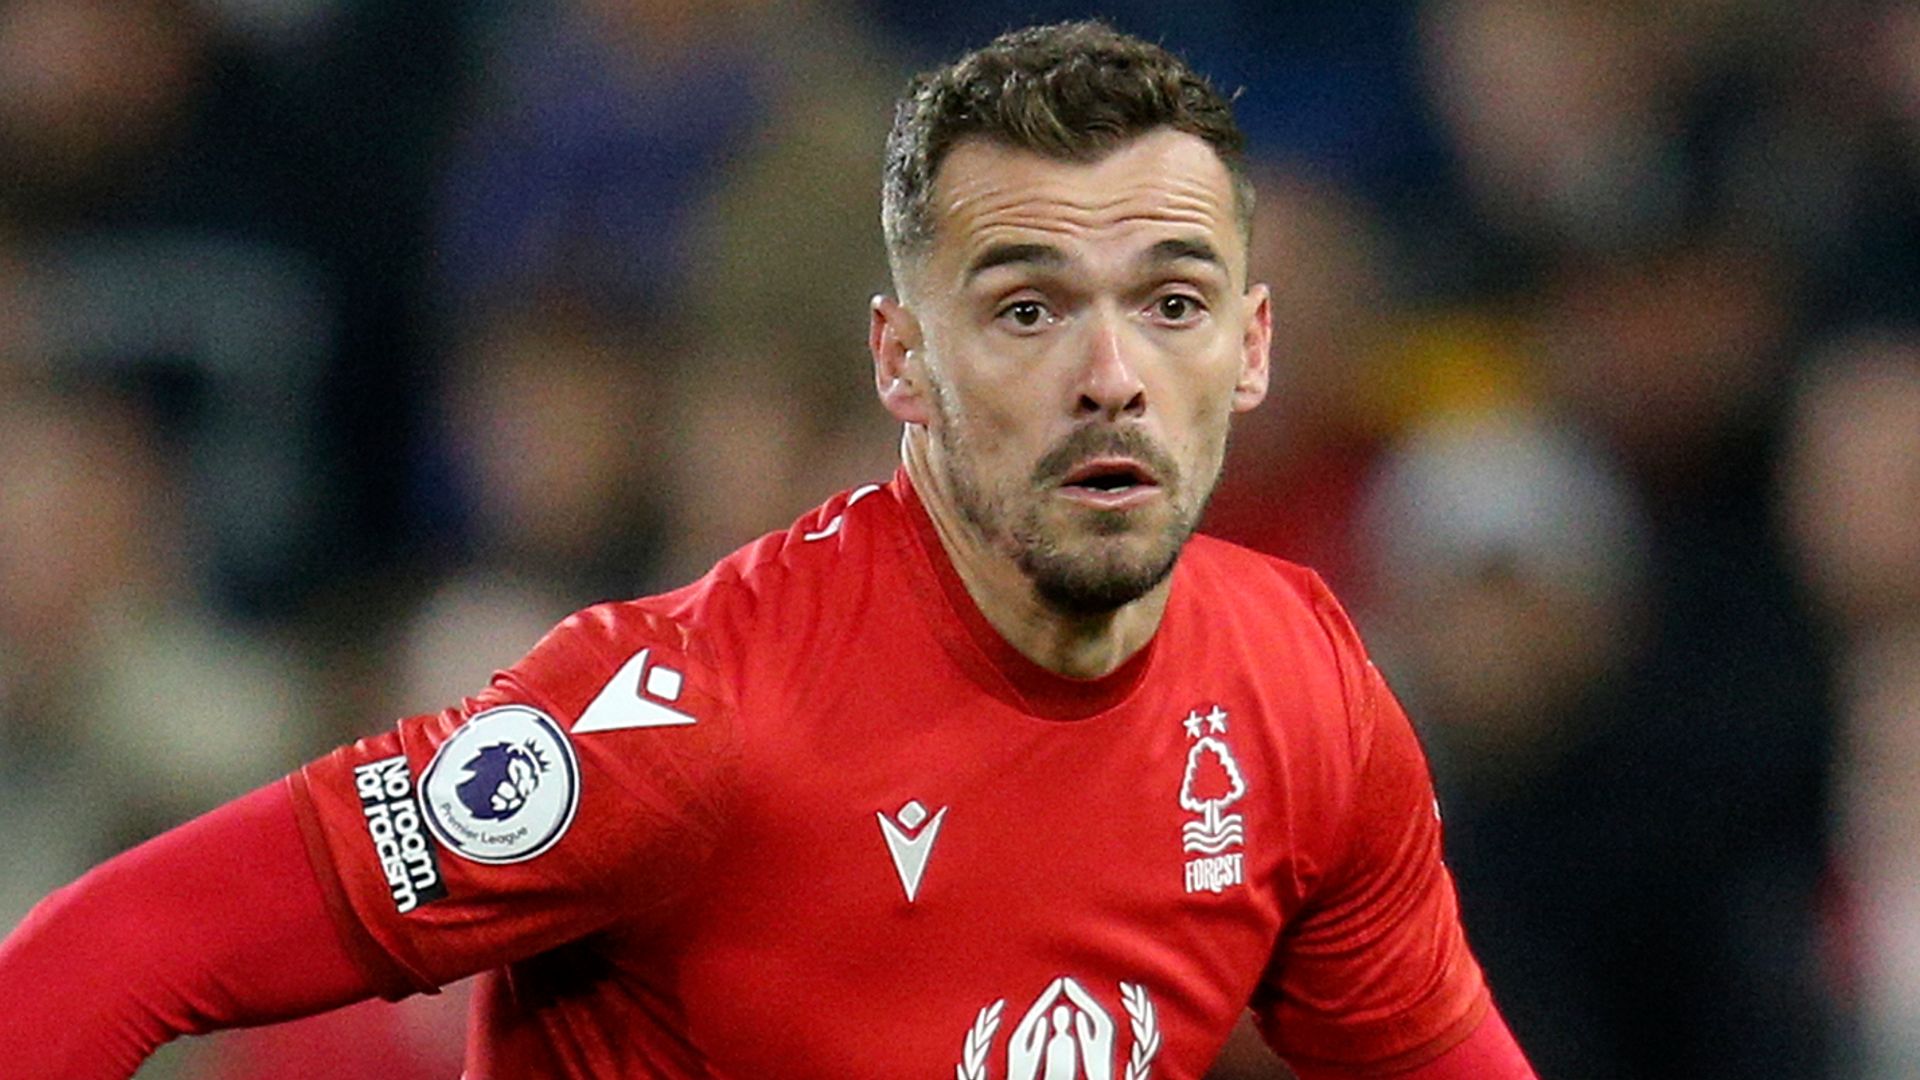 Toffolo's poor mental health contributed to betting breaches